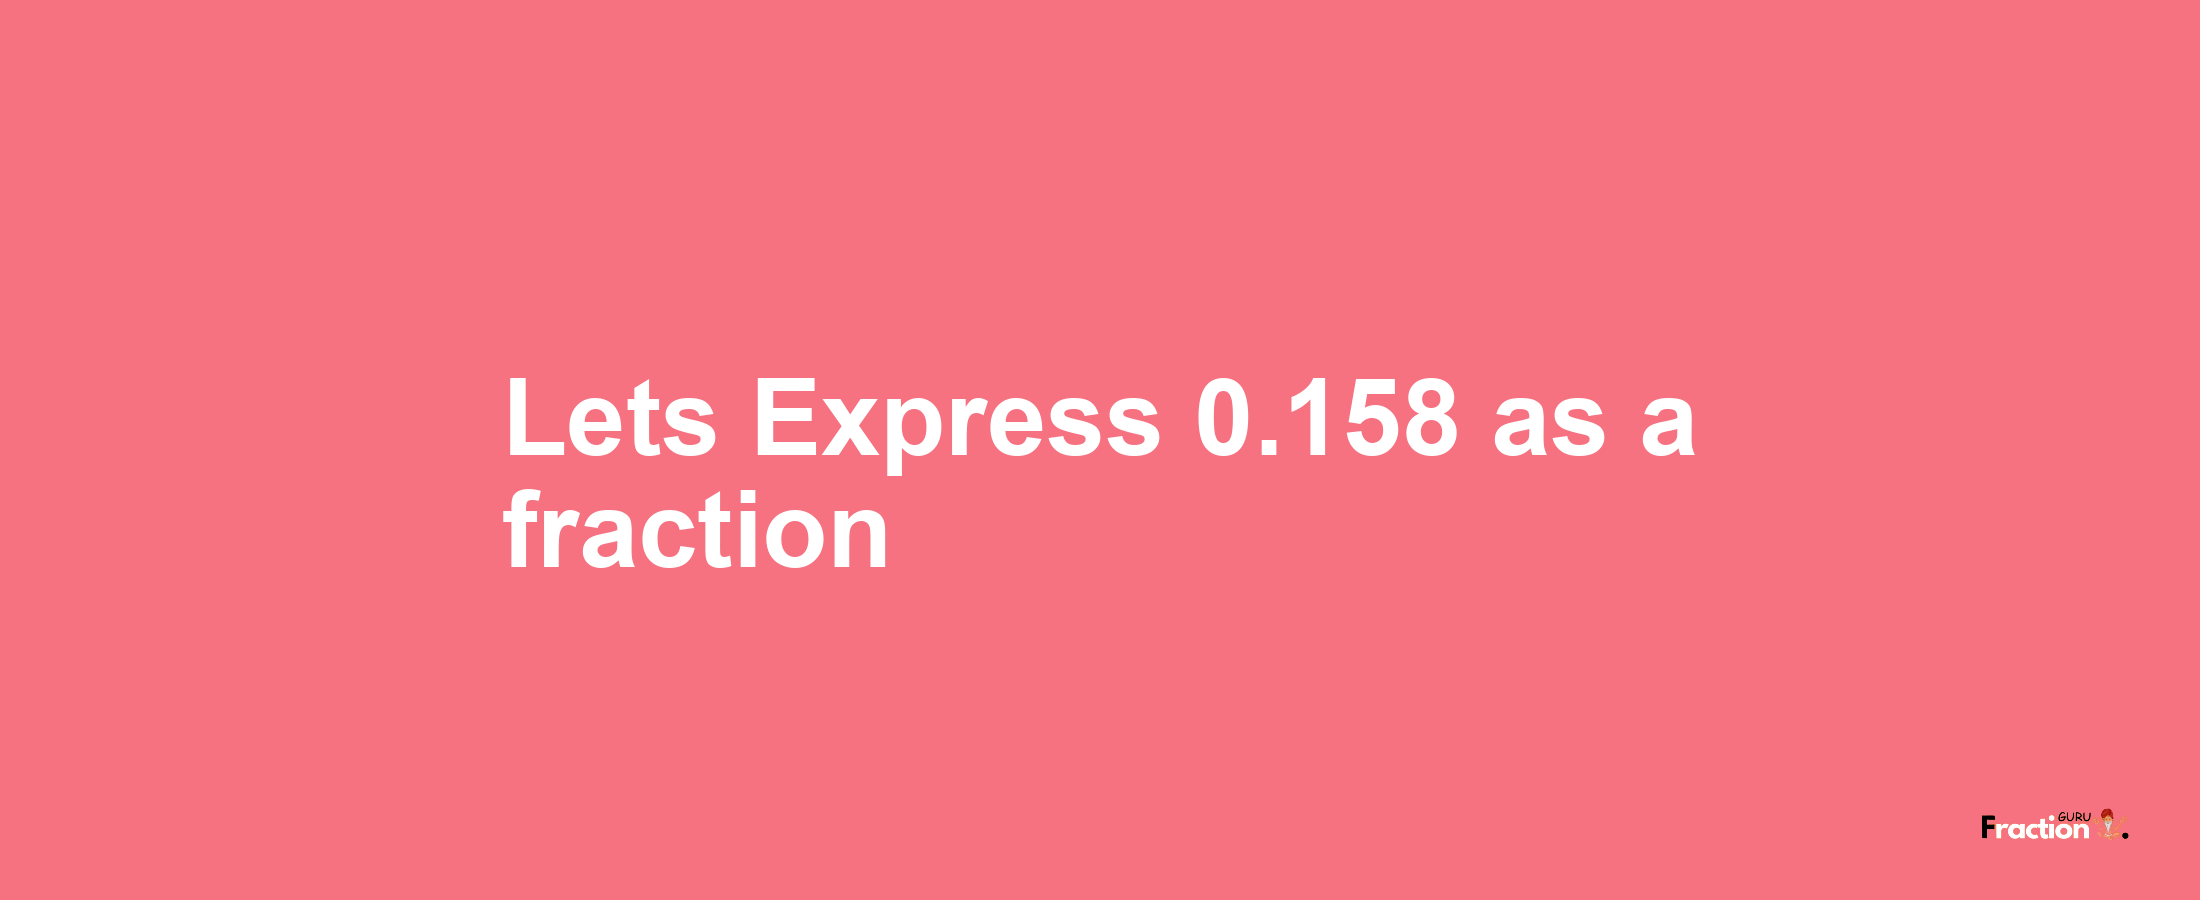 Lets Express 0.158 as afraction